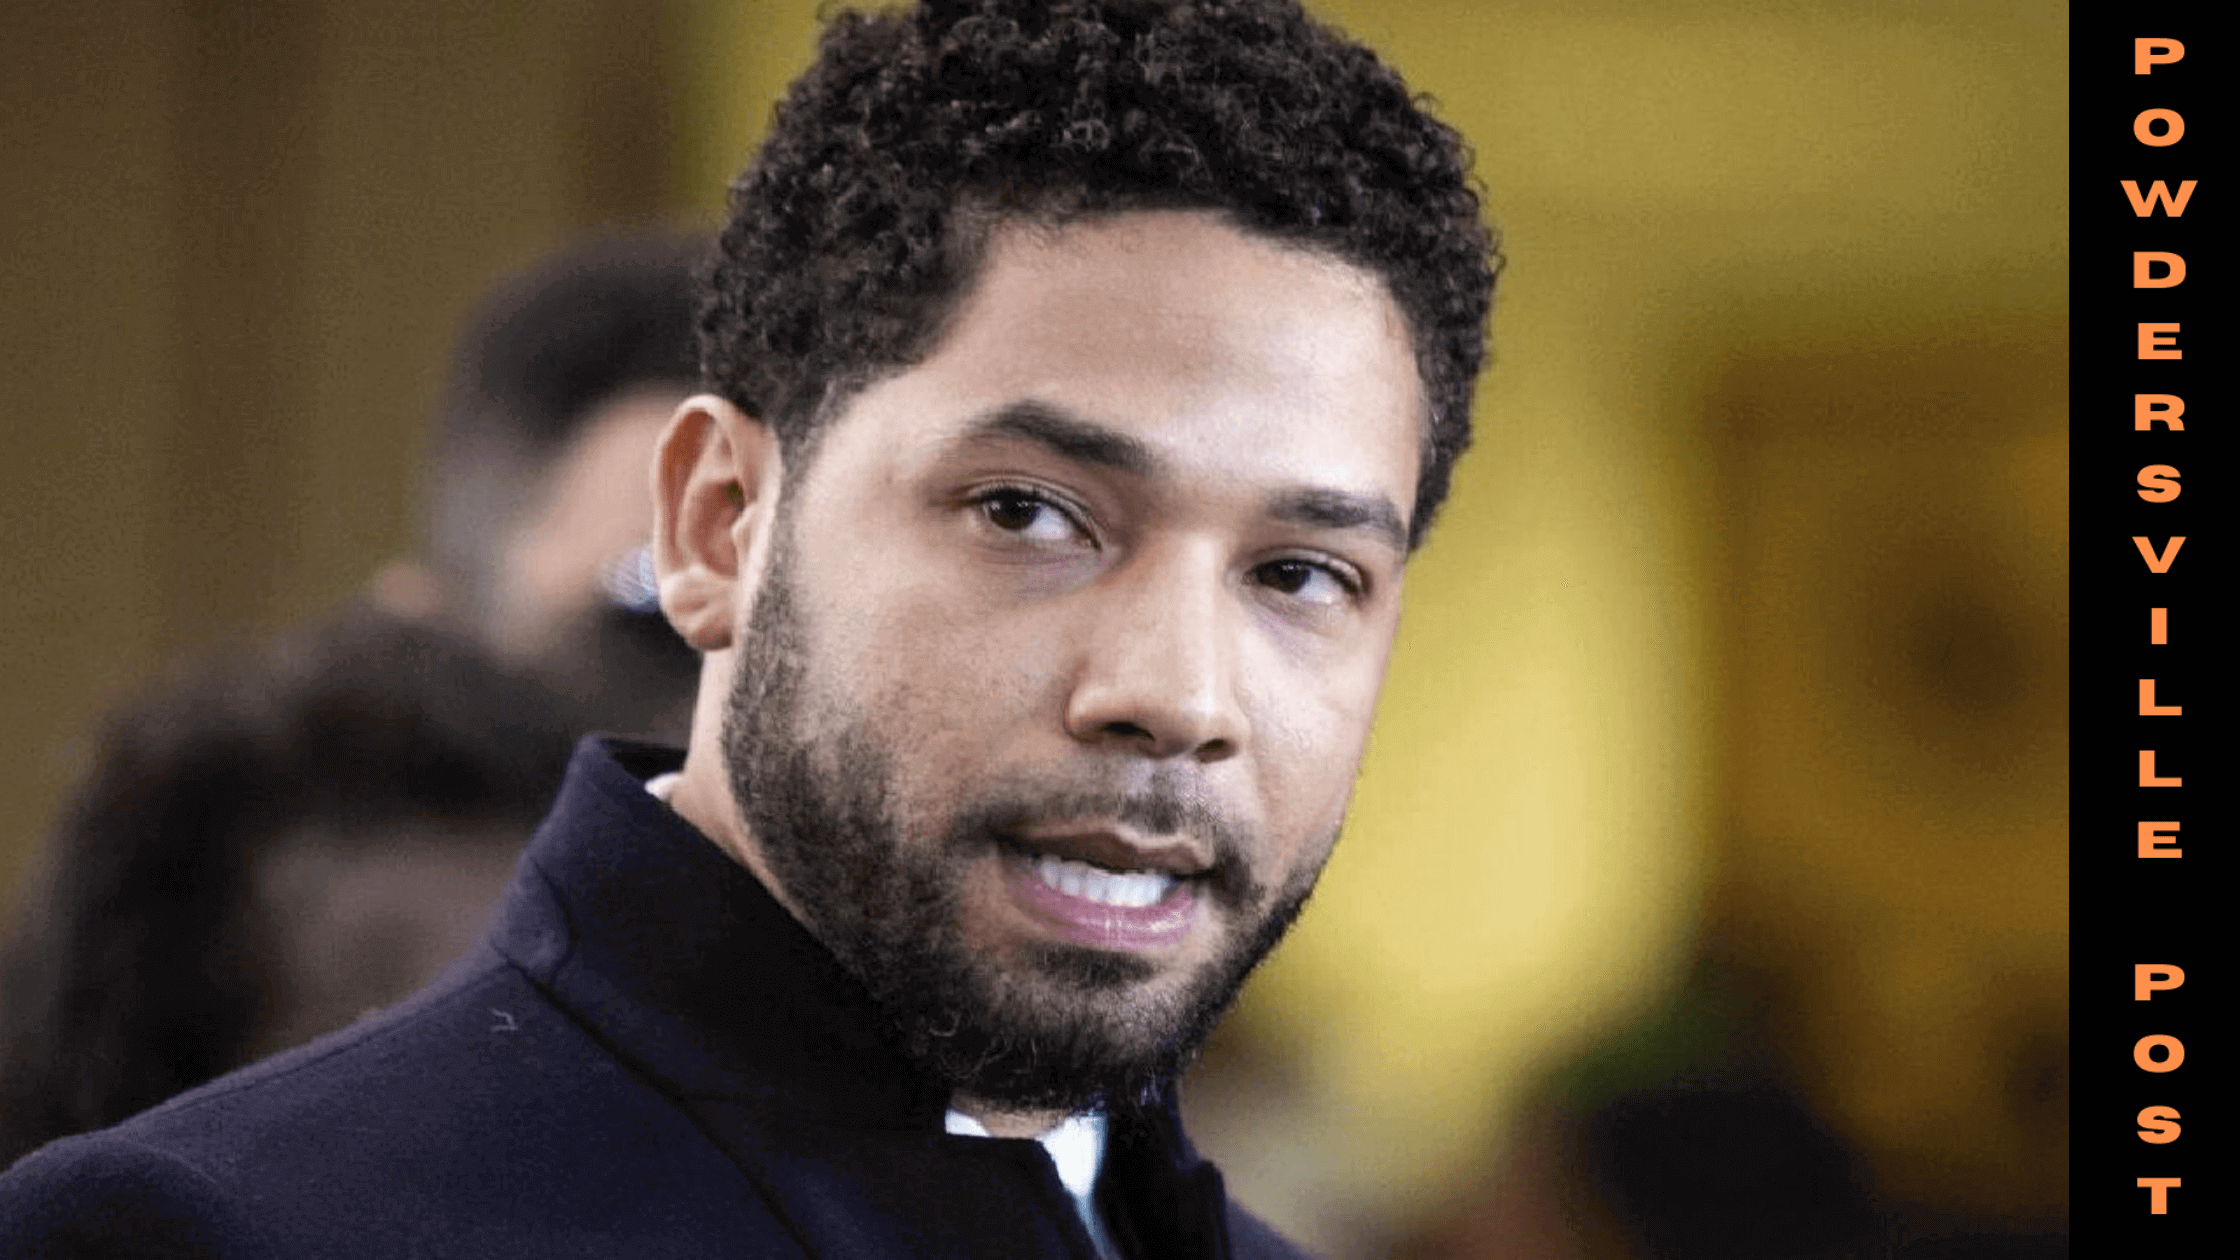 Pending Appeal Of American Actor Jussie Smollett Releases Him From Jail